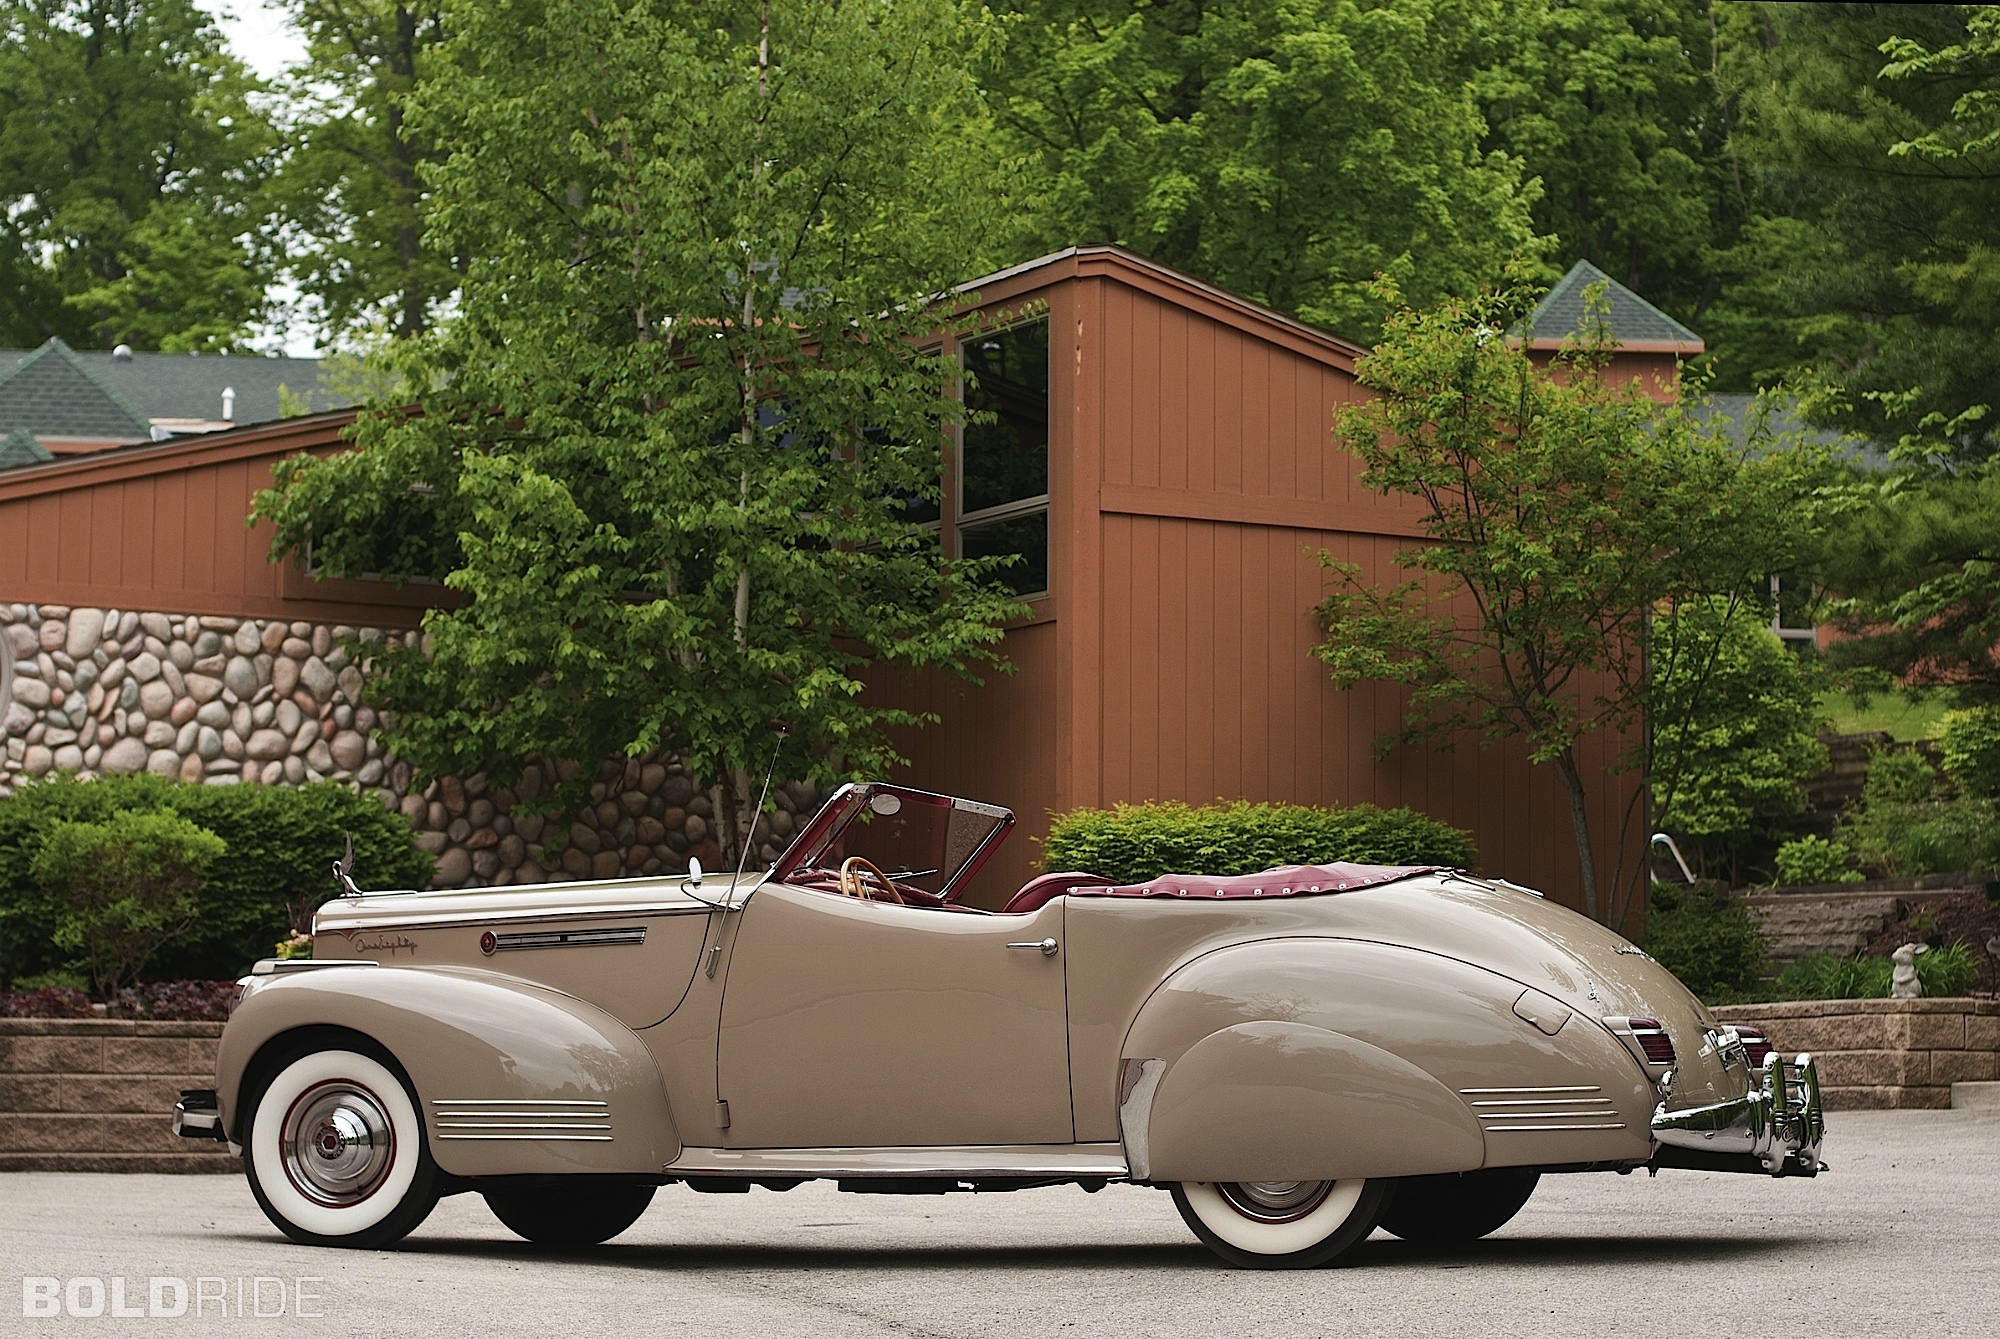 Packard De Luxe Eight Photo Gallery: Photo #06 out of 11, Image ...